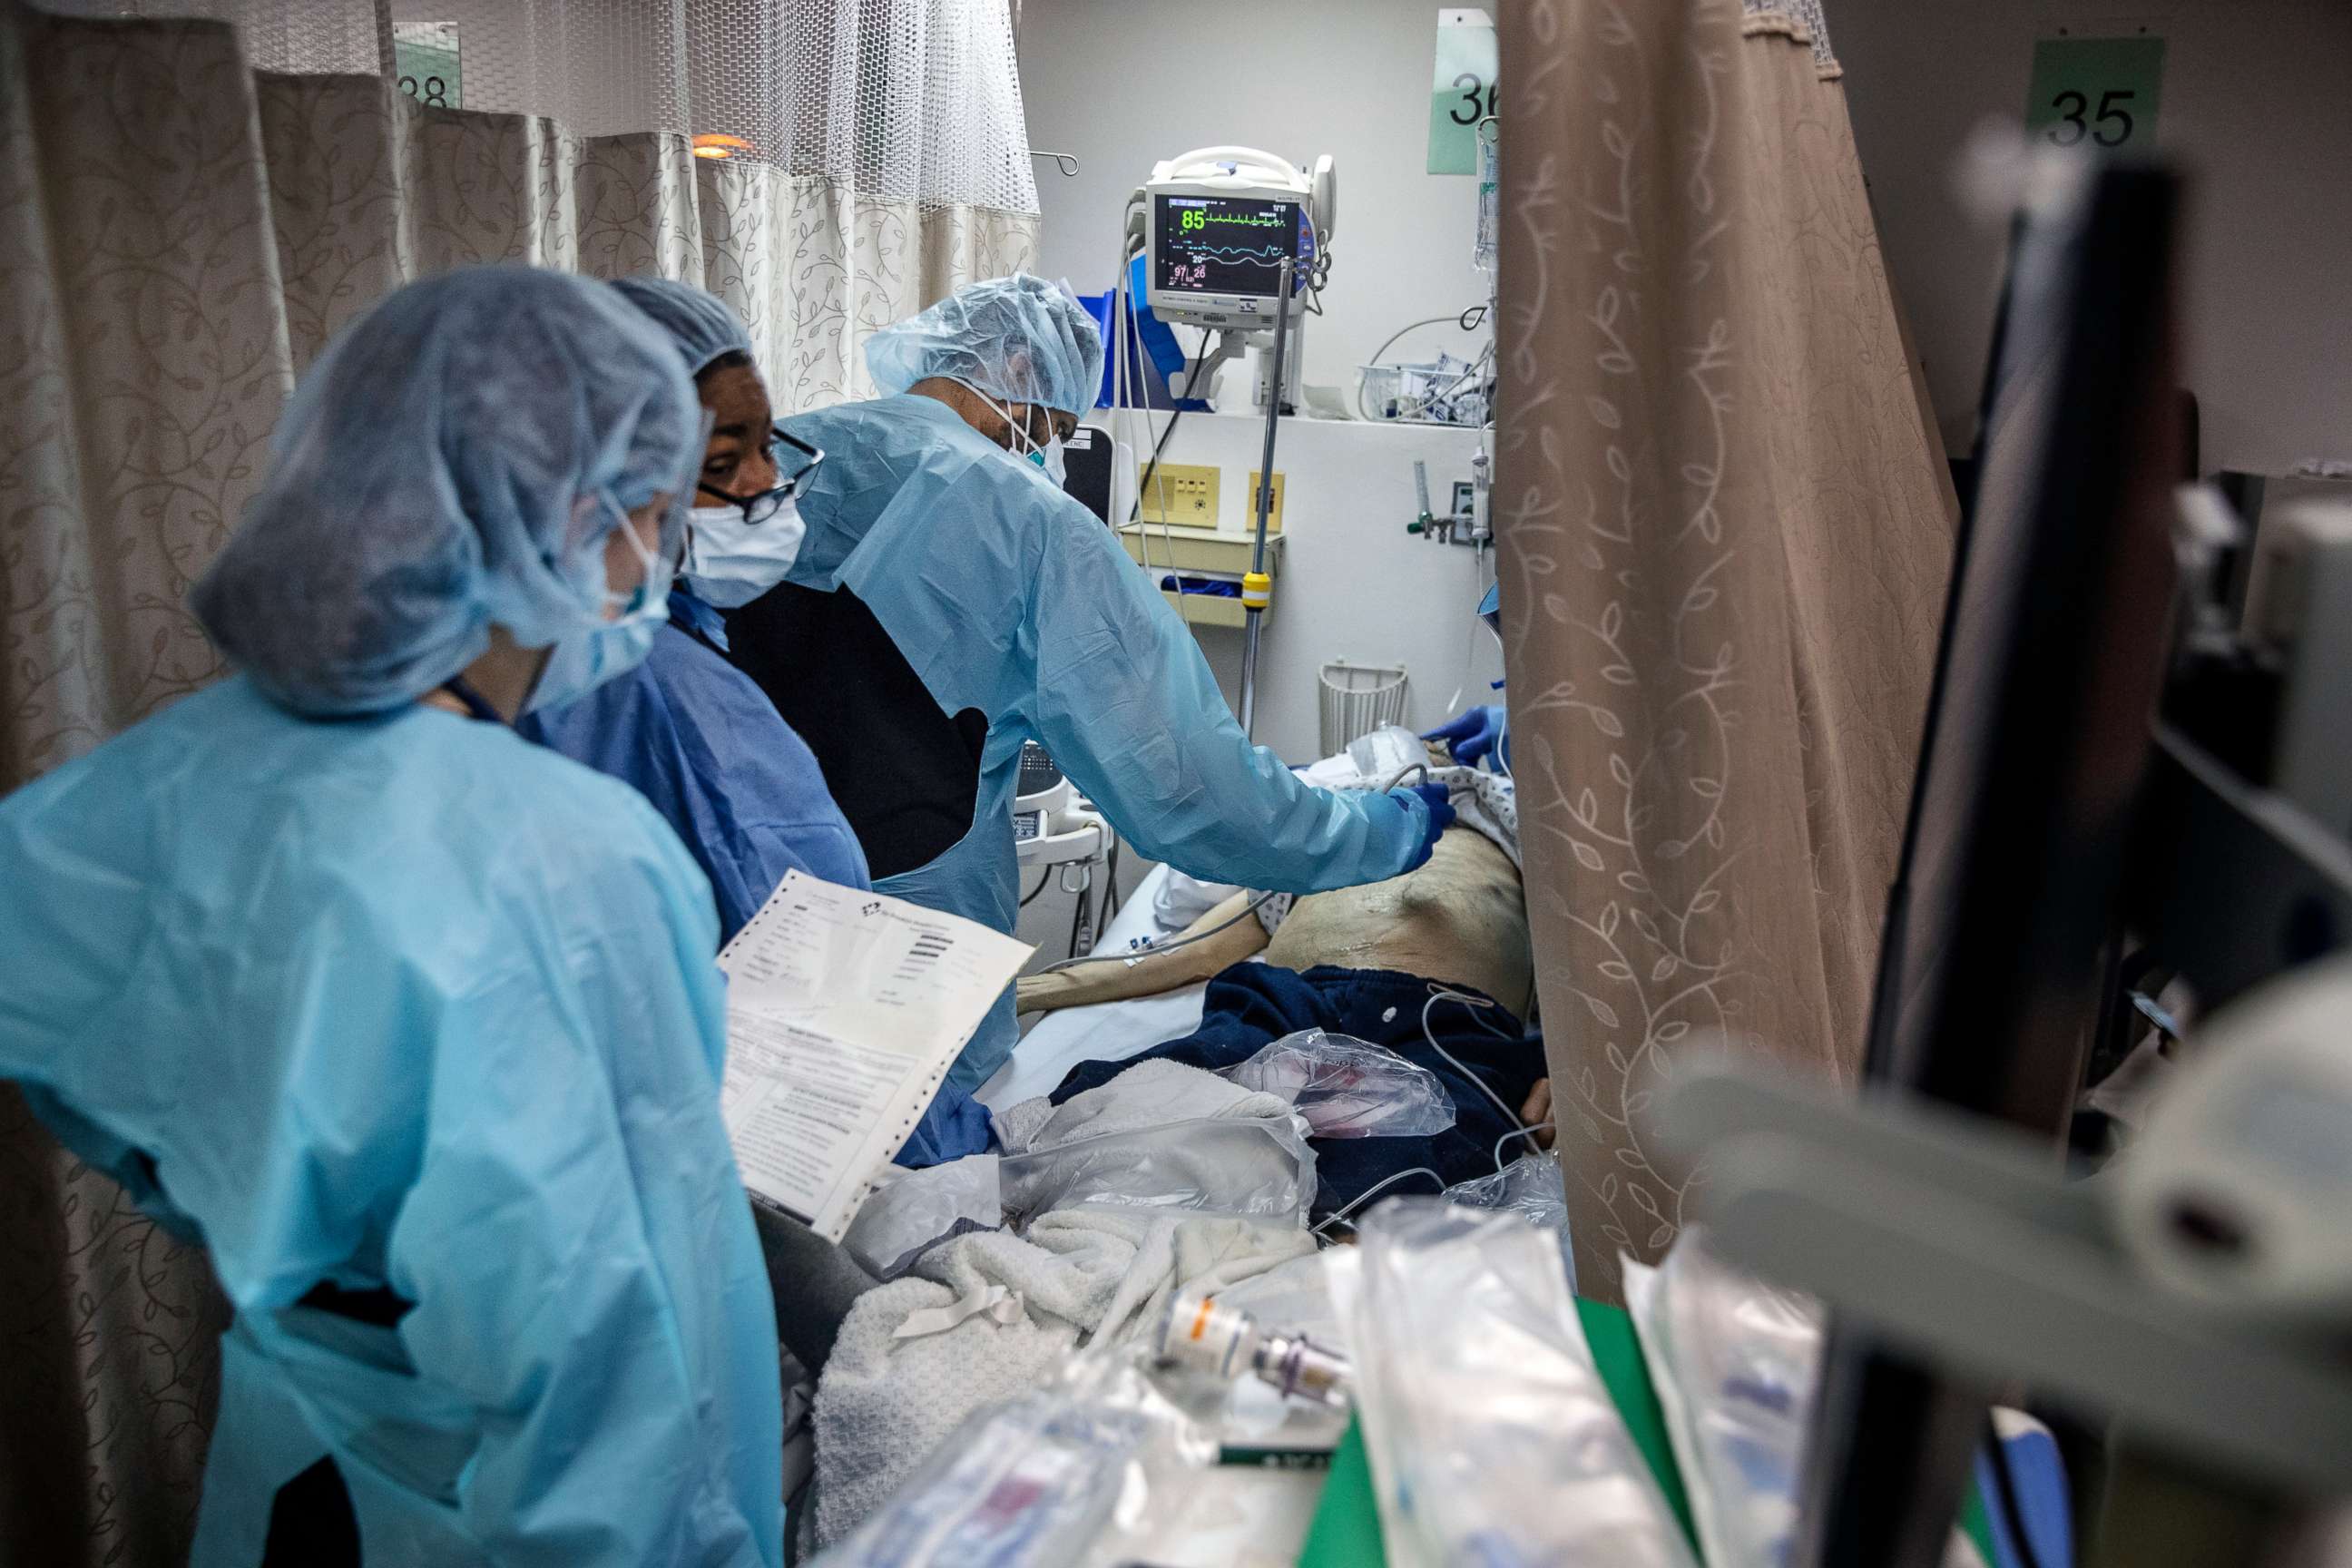 PHOTO: Medical staff treat a patient in a Covid-19 ward at the Brooklyn Hospital Center in New York on Monday, March 23, 2020.